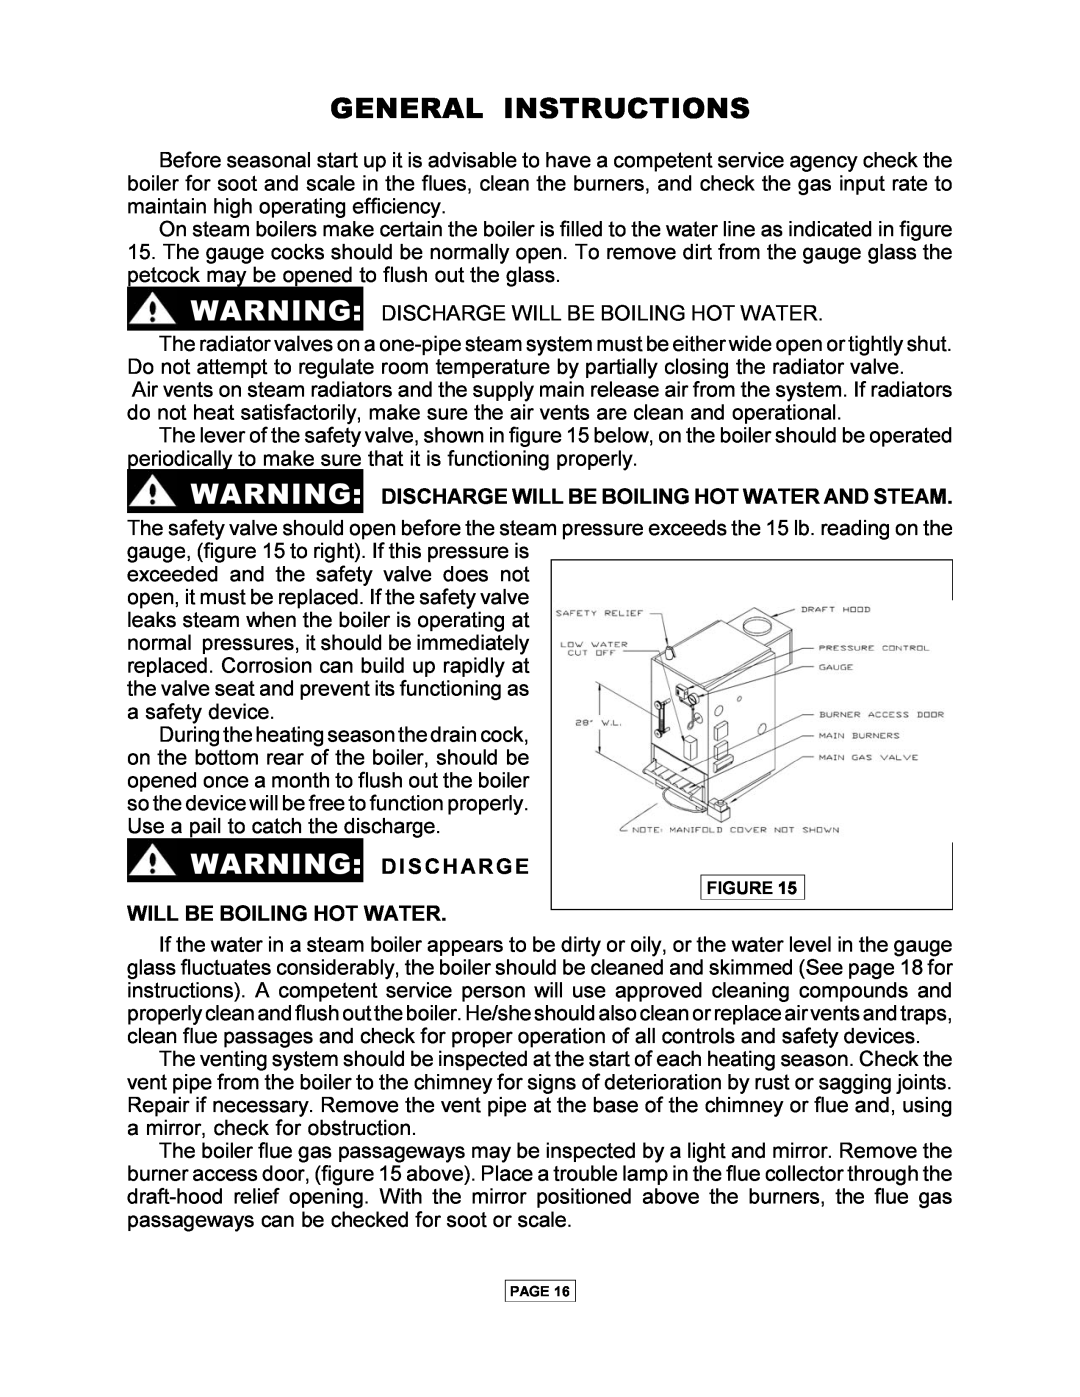 Utica PEG-C installation manual General Instructions, Discharge Will Be Boiling Hot Water And Steam 